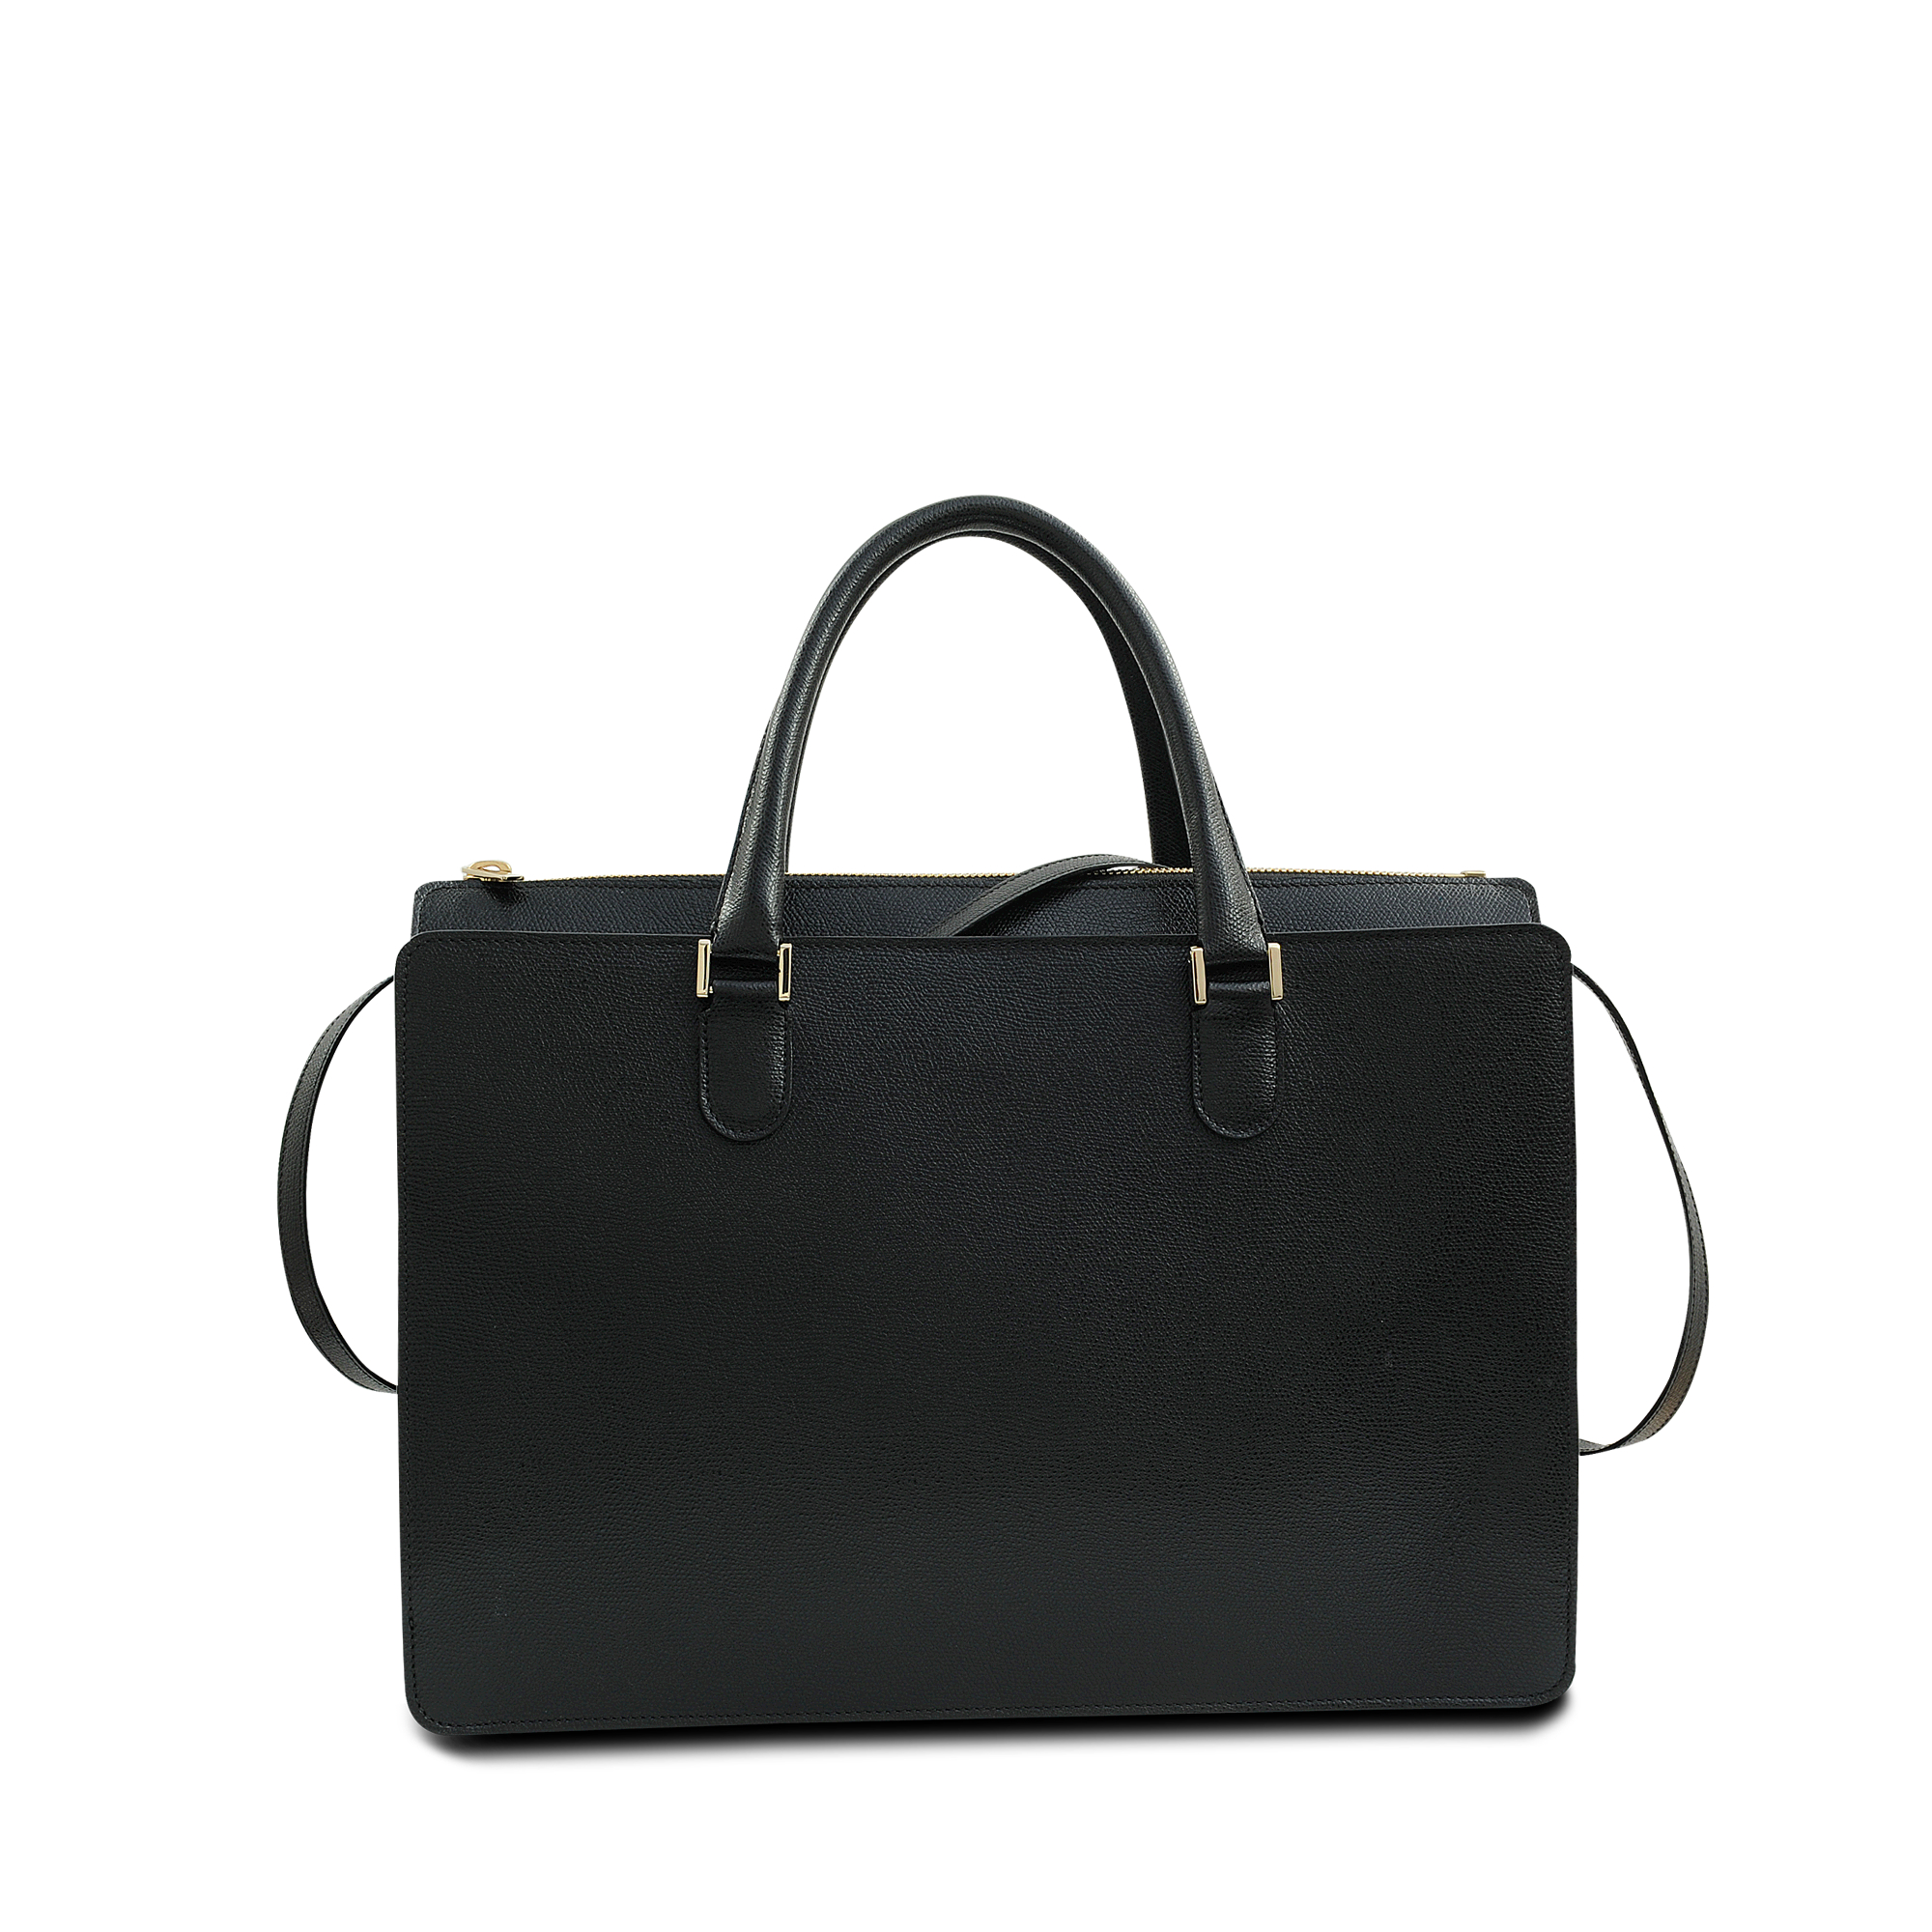 Valextra Leather Madison Bag in Black - Lyst